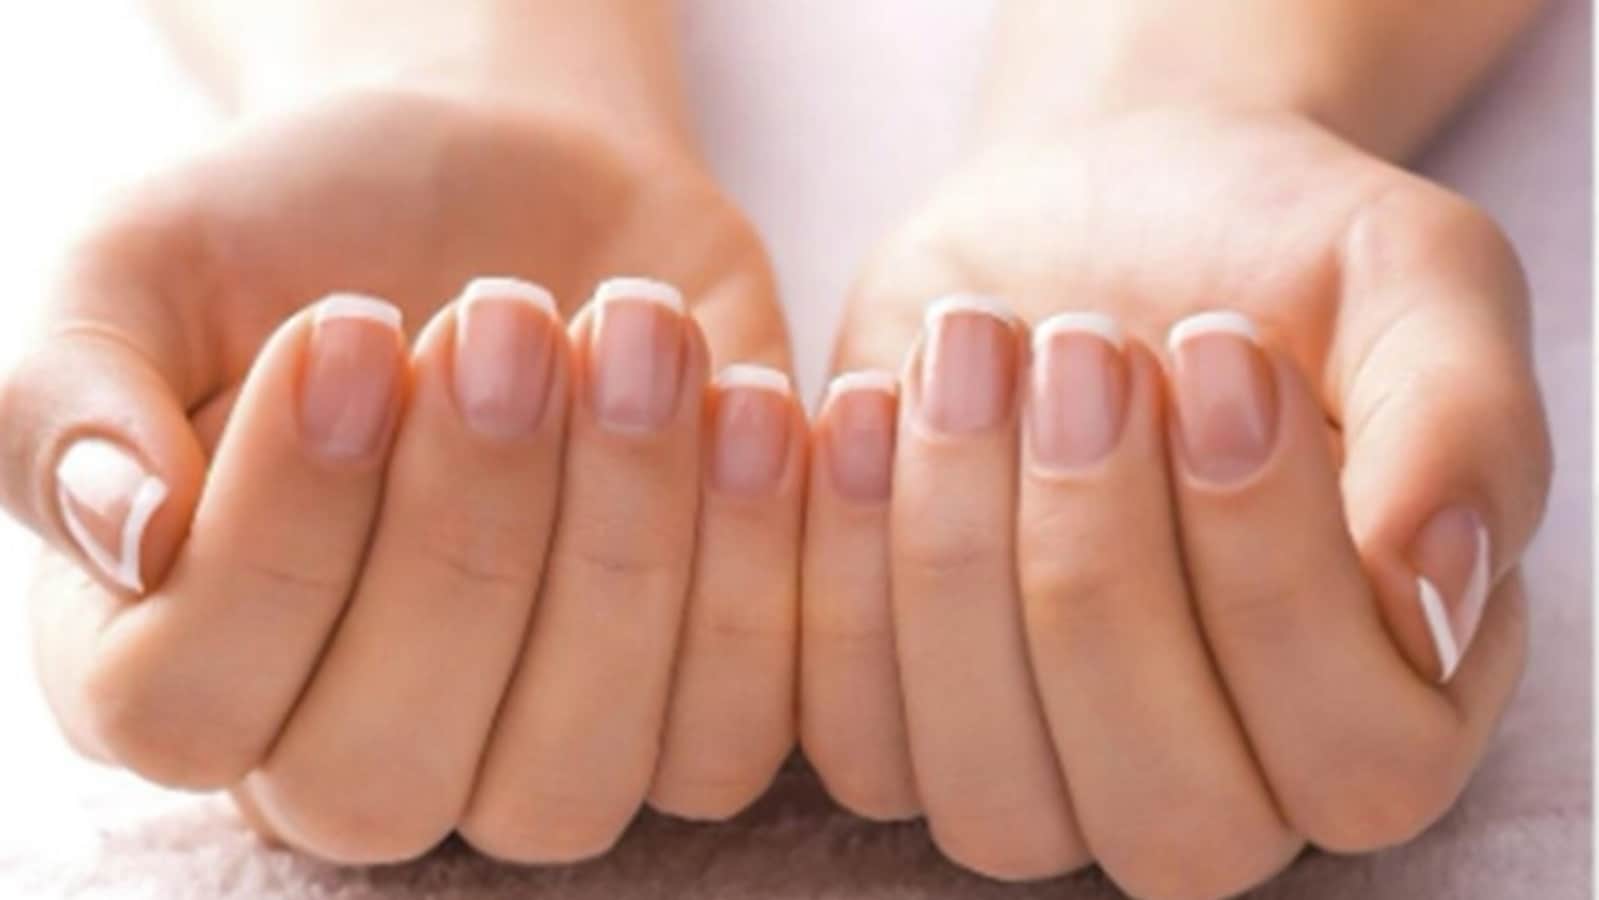 Why Are My Nails Brittle? Causes of Weak Nails - GoodRx